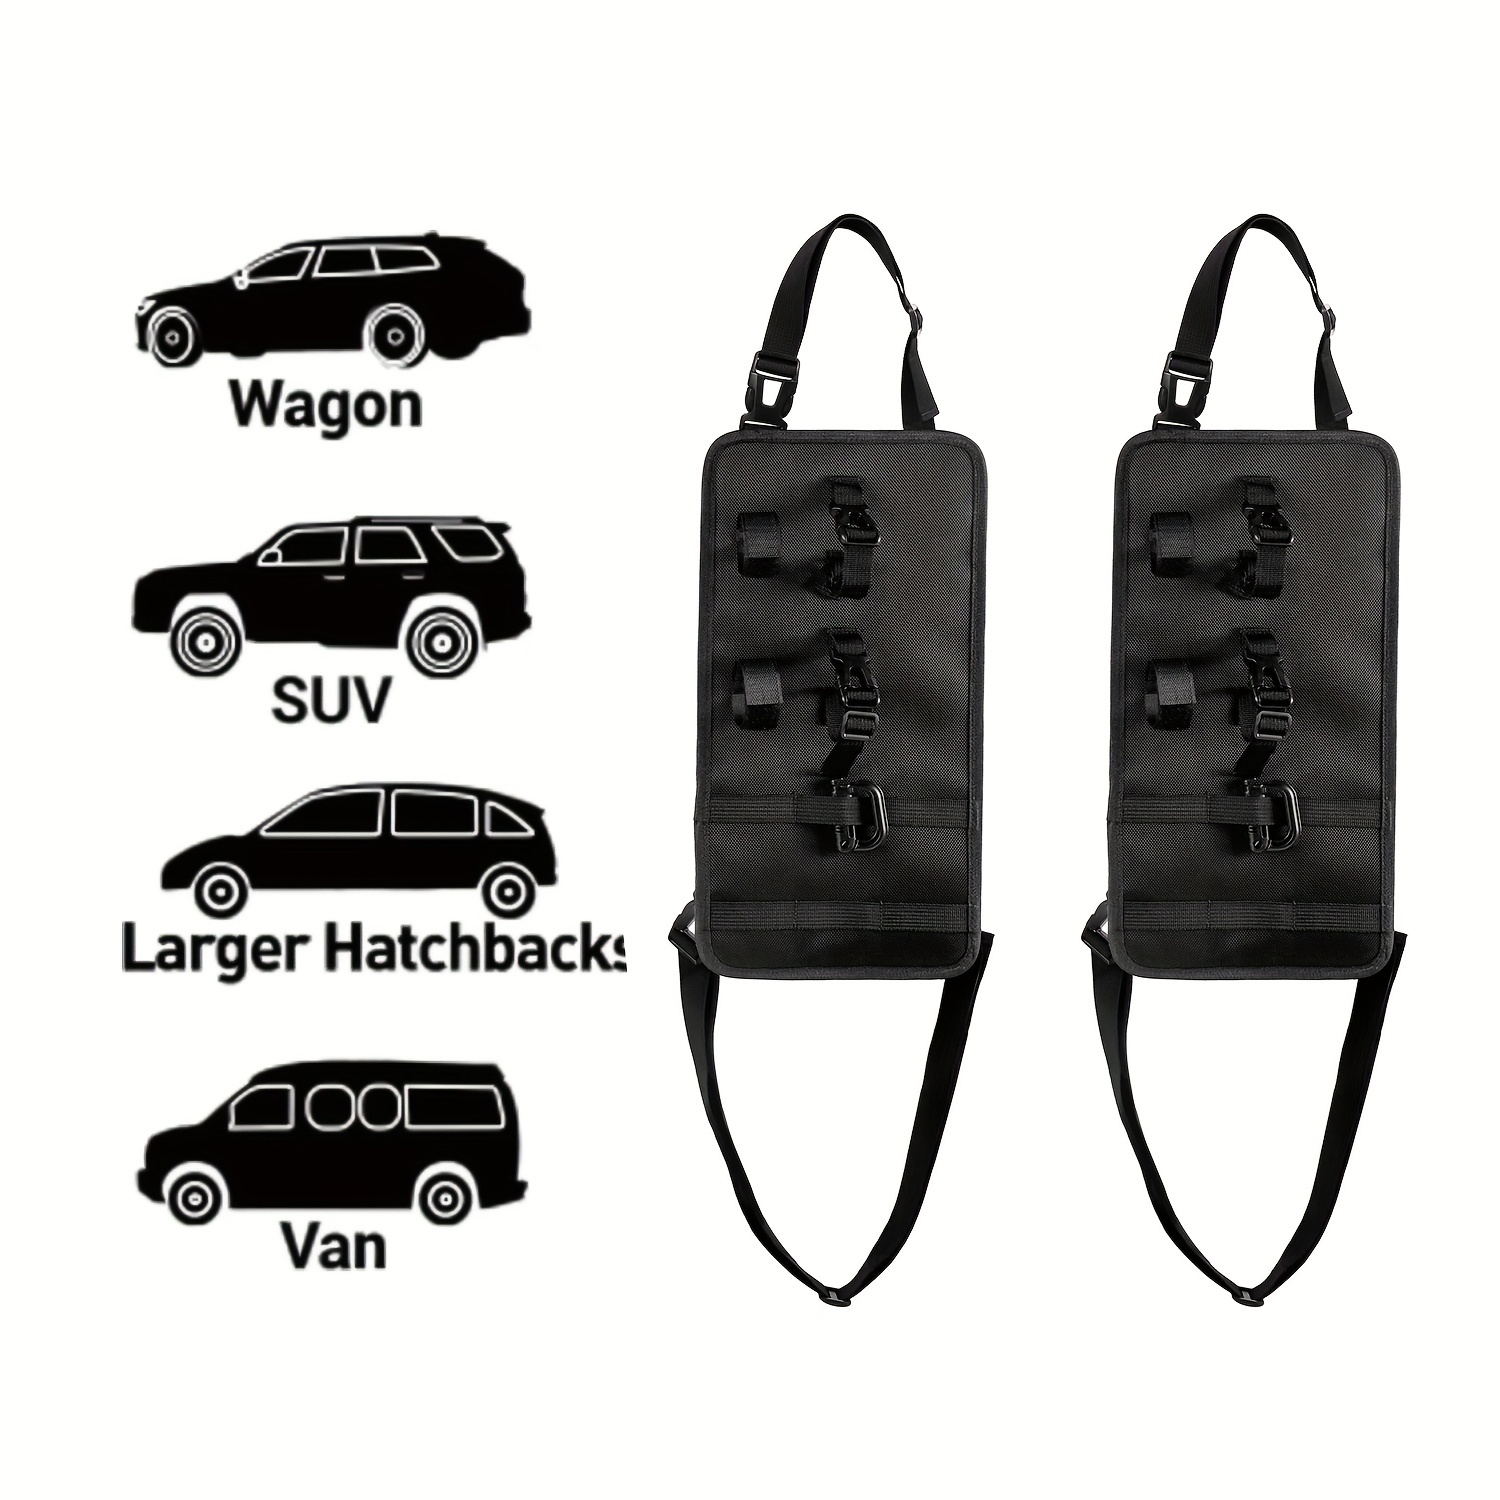 * For Car, Adjustable Fishing Pole Storage Rack For SUV, Wagons, Van, Easy  Installing Fishing Car Rod Carrier For Car